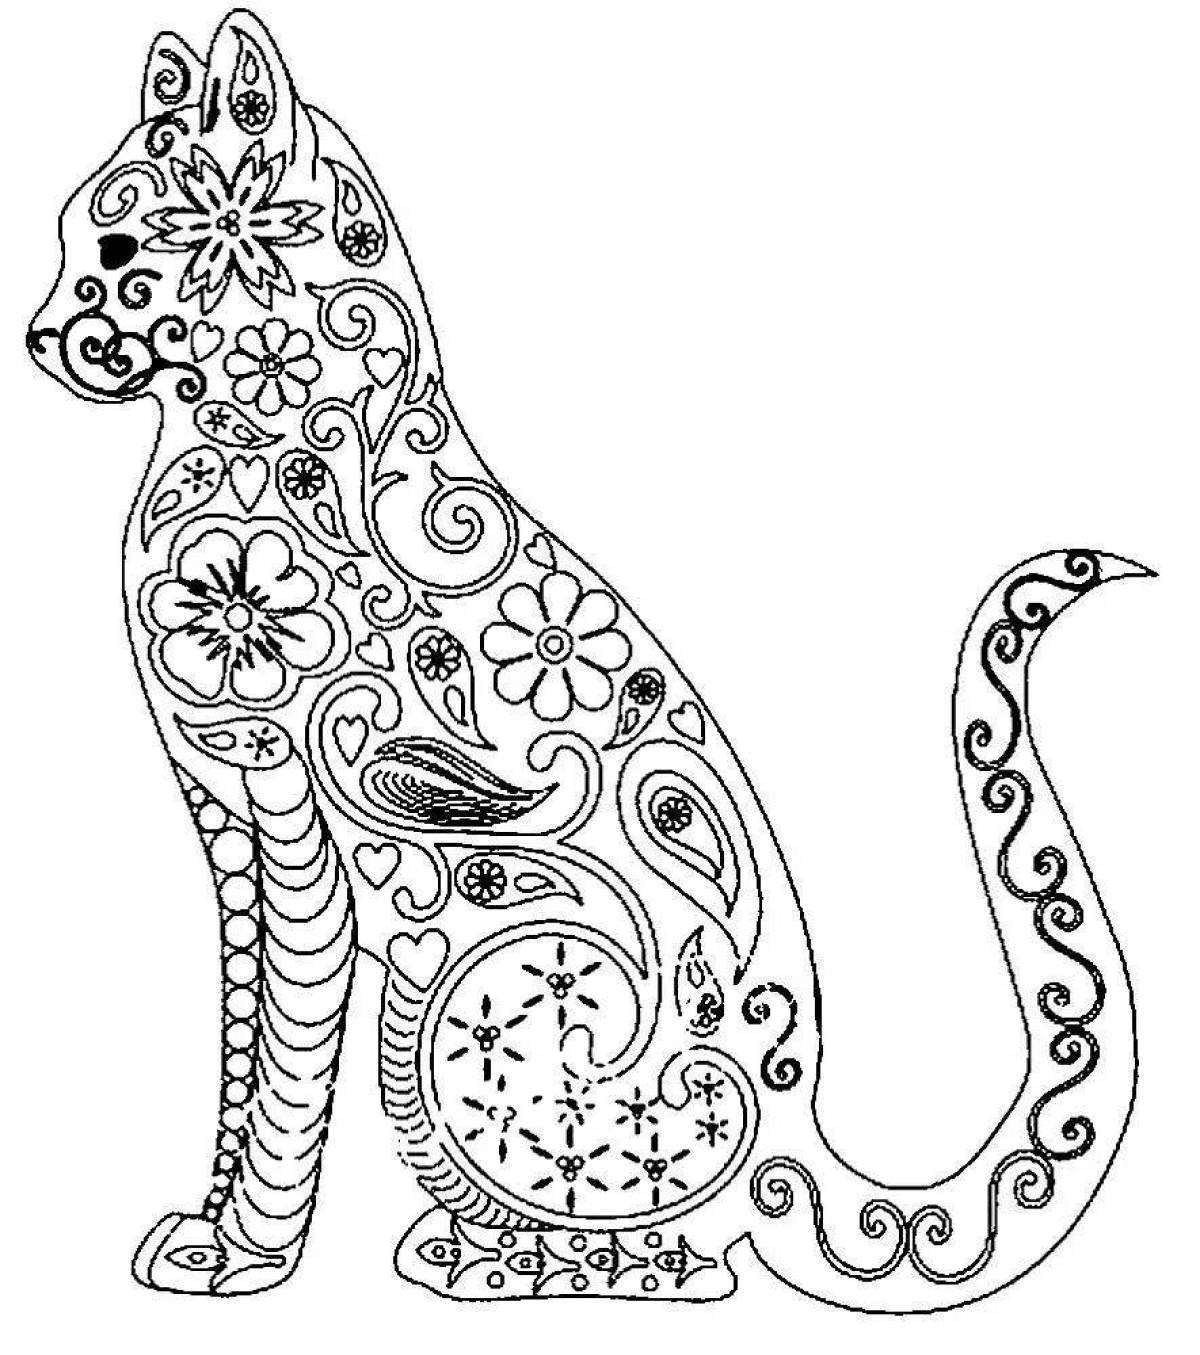 Adorable patterned coloring book